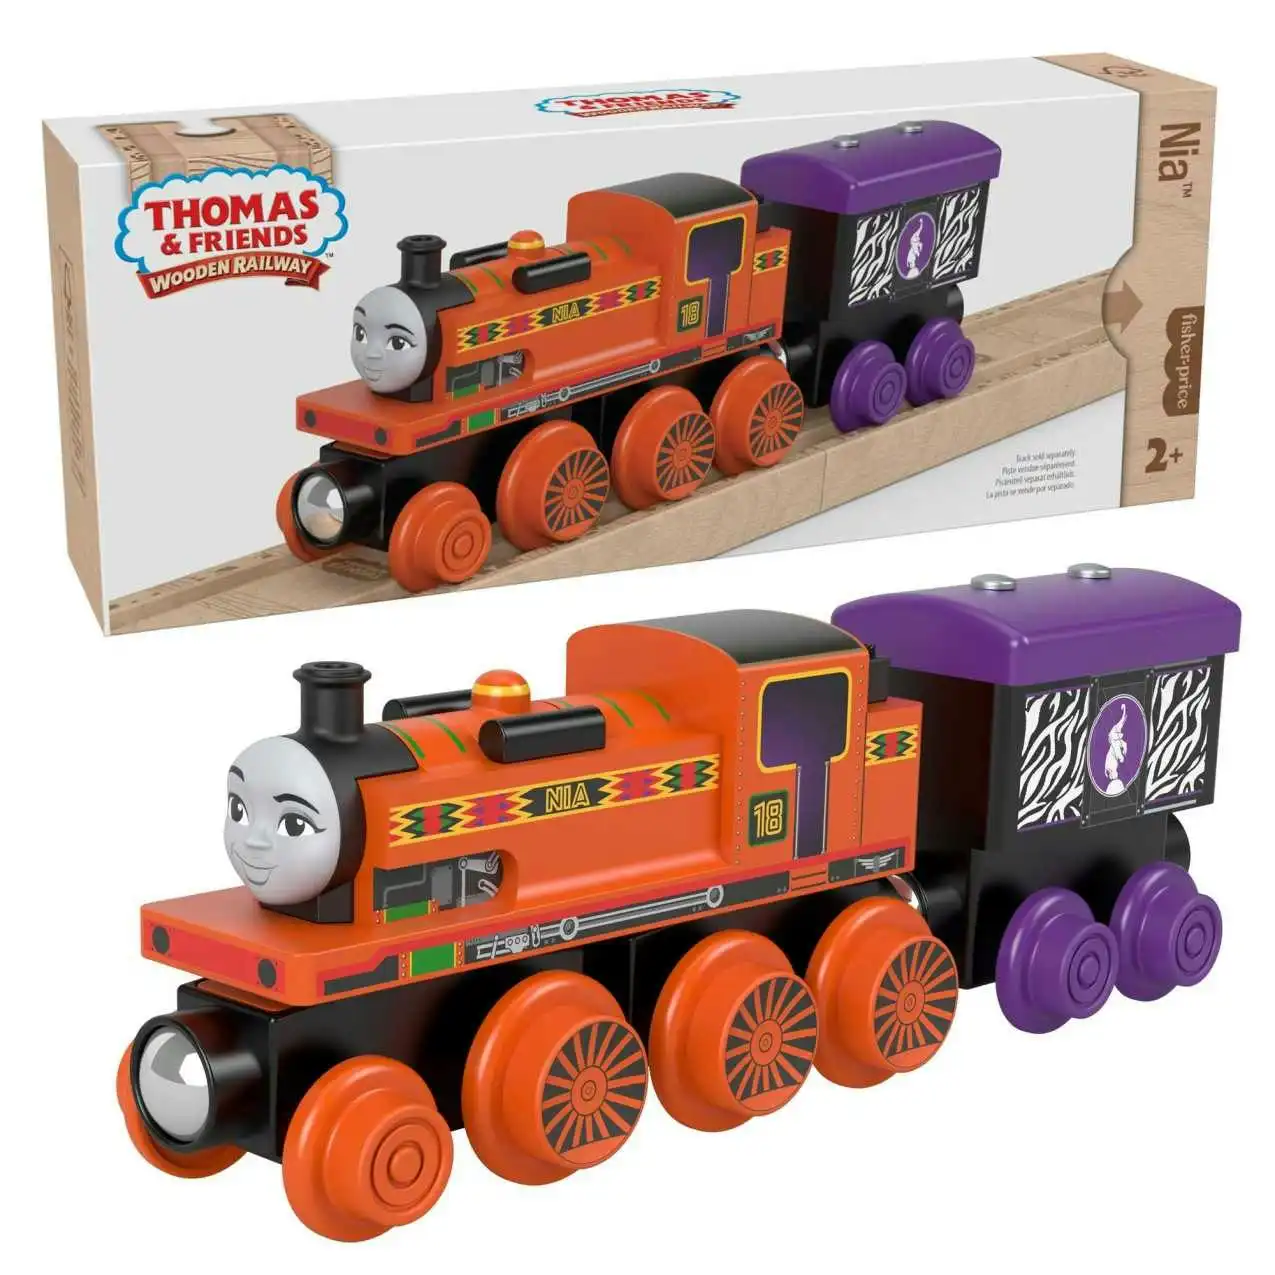 Thomas & Friends Wooden Railway Nia™ Engine and Coal-Car - Fisher-Price